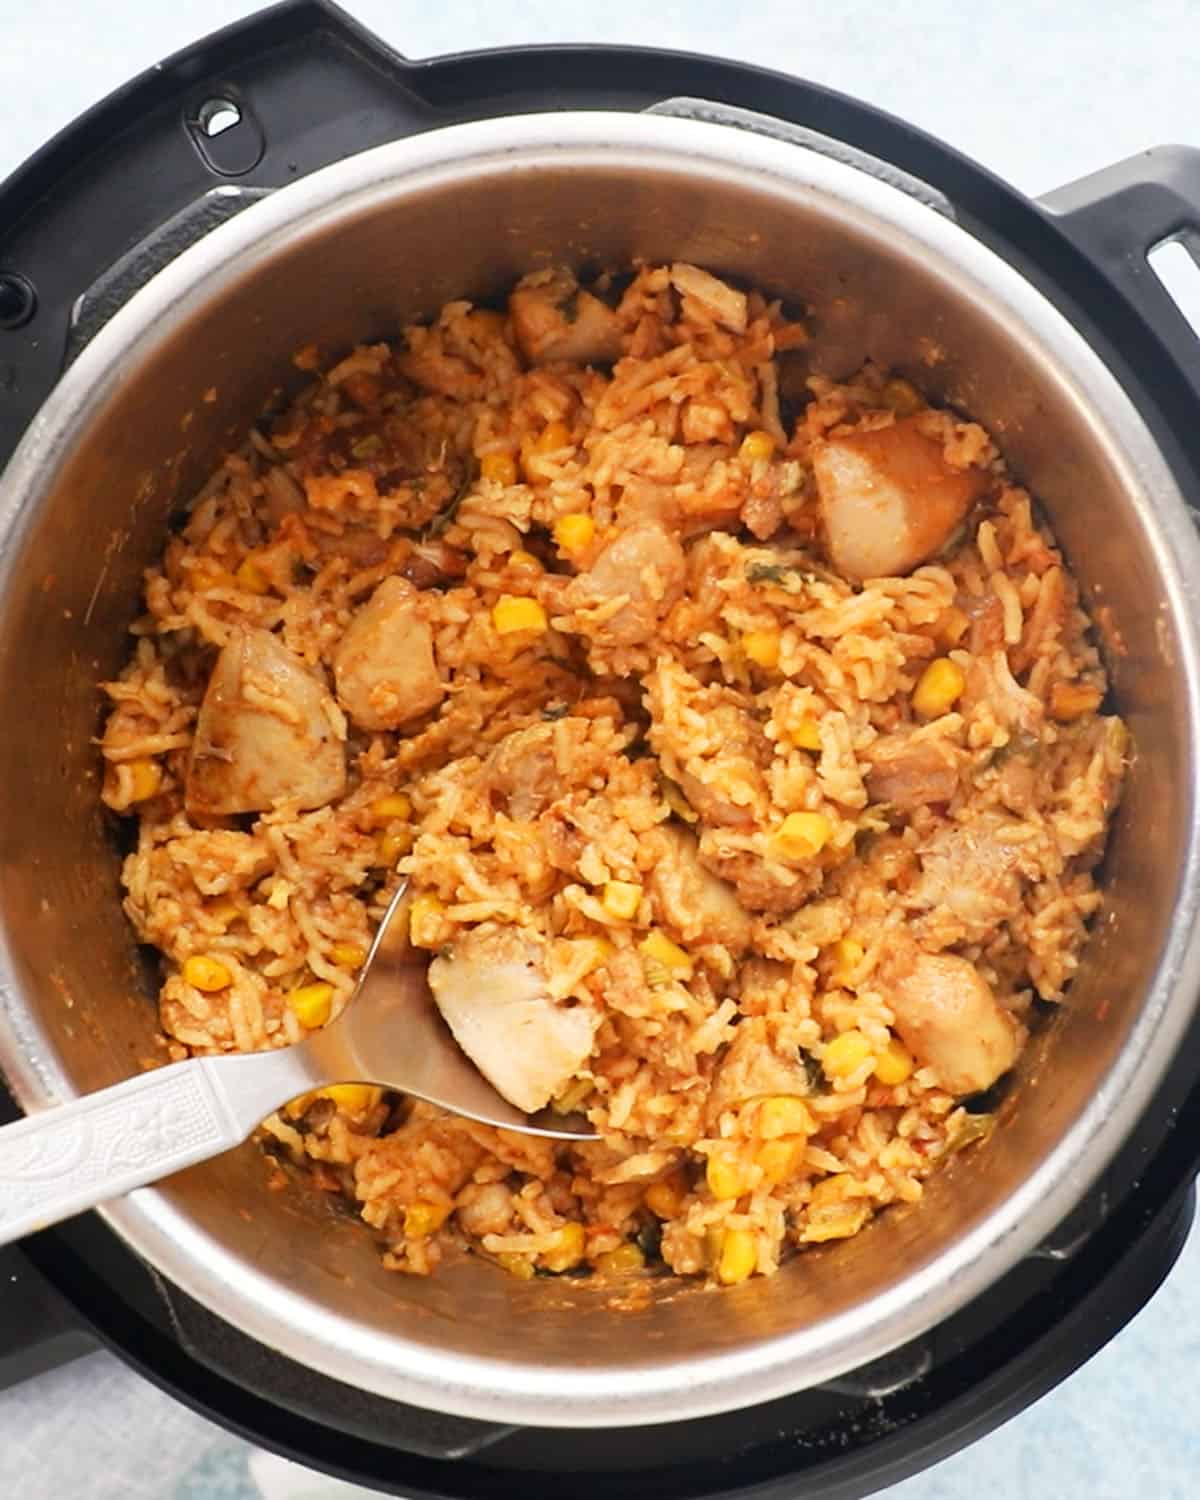 cooked chicken and rice in an instant pot.